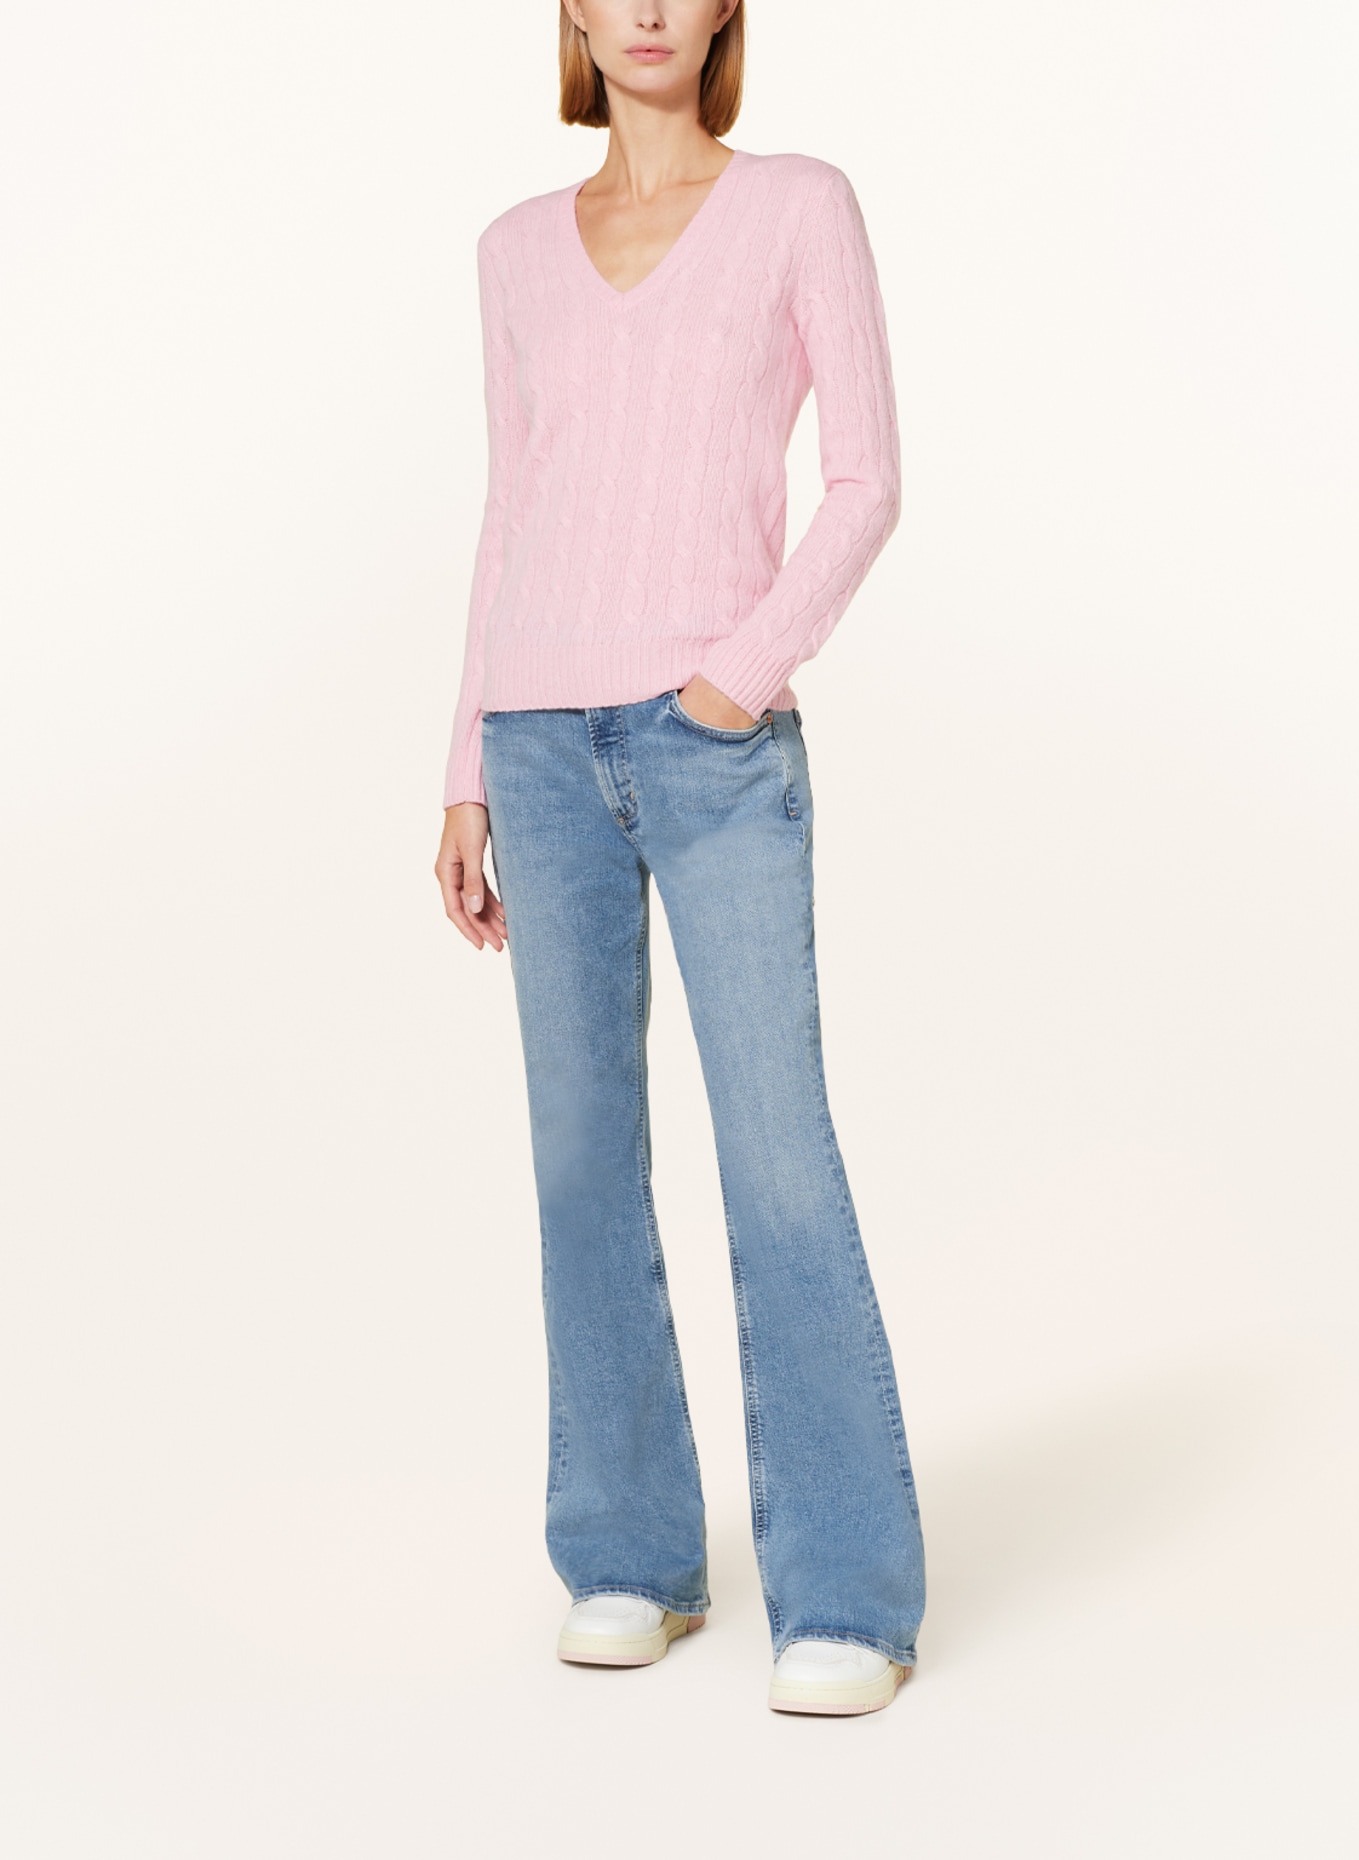 POLO RALPH LAUREN Sweater, Color: PINK (Image 2)